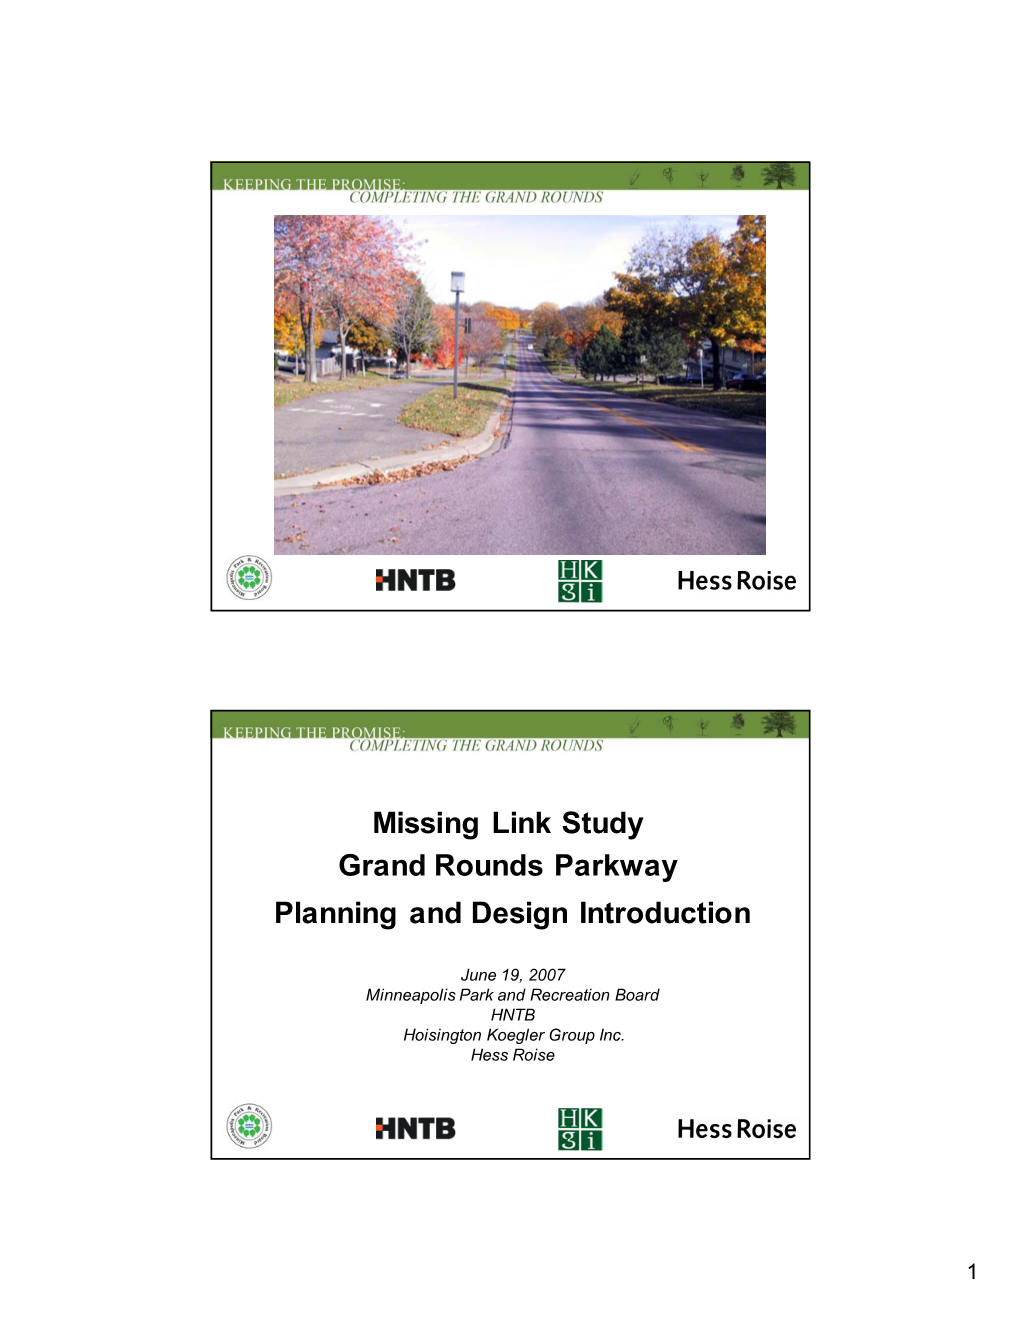 Missing Link Study Grand Rounds Parkway Planning and Design Introduction